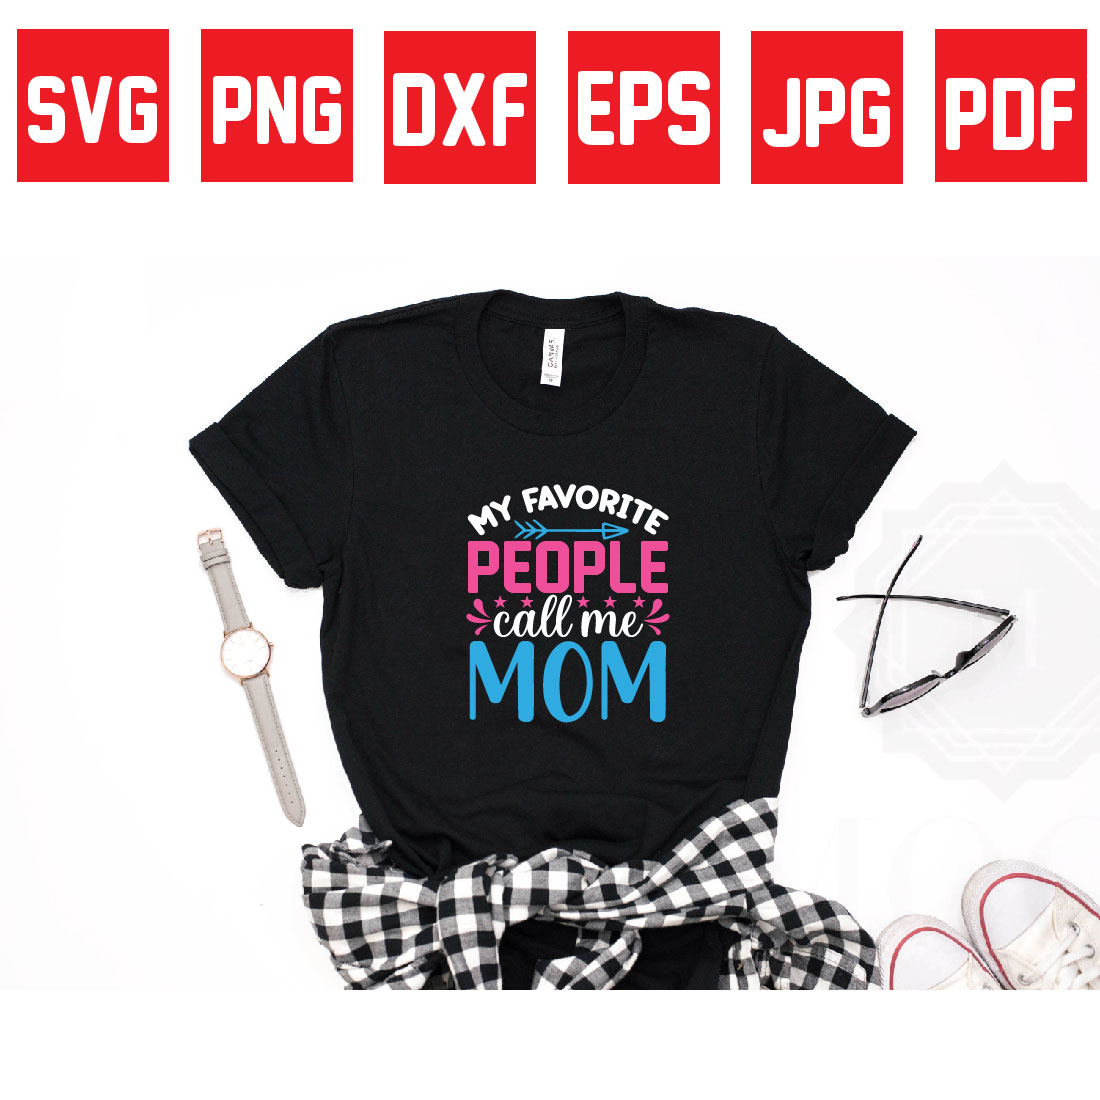 my favorite people call me mom preview image.